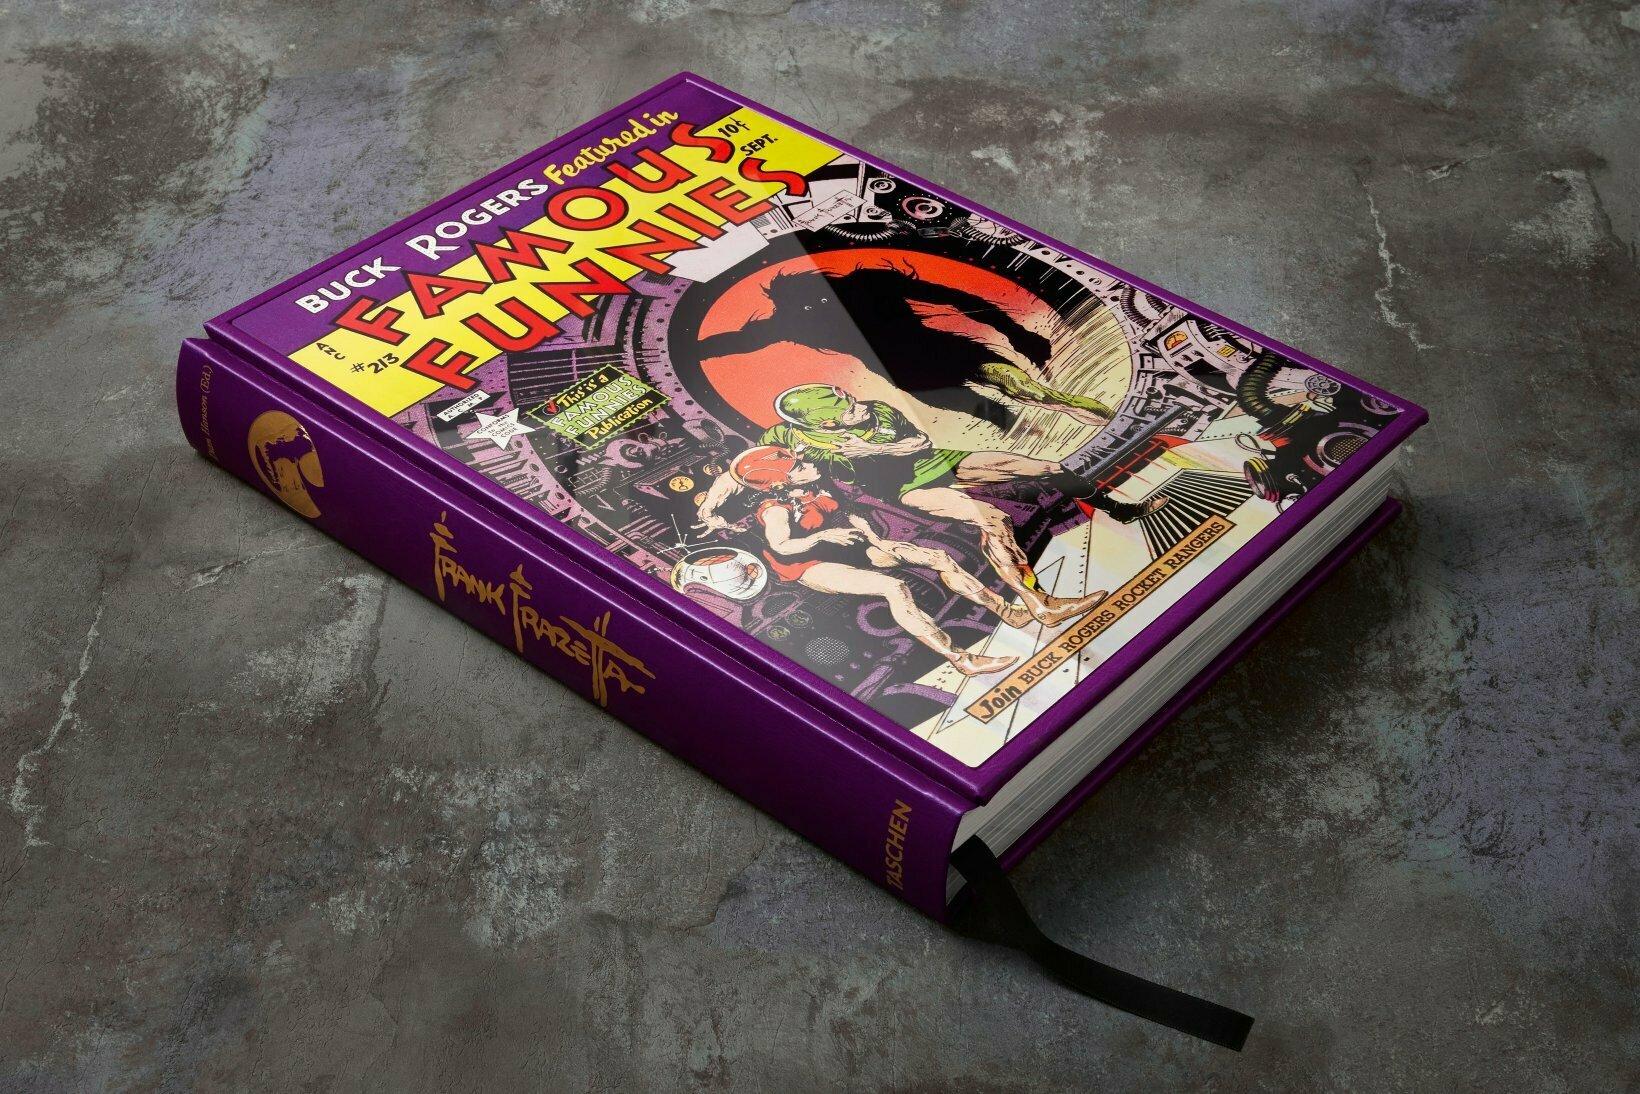 the fantastic worlds of frank frazetta collector's edition